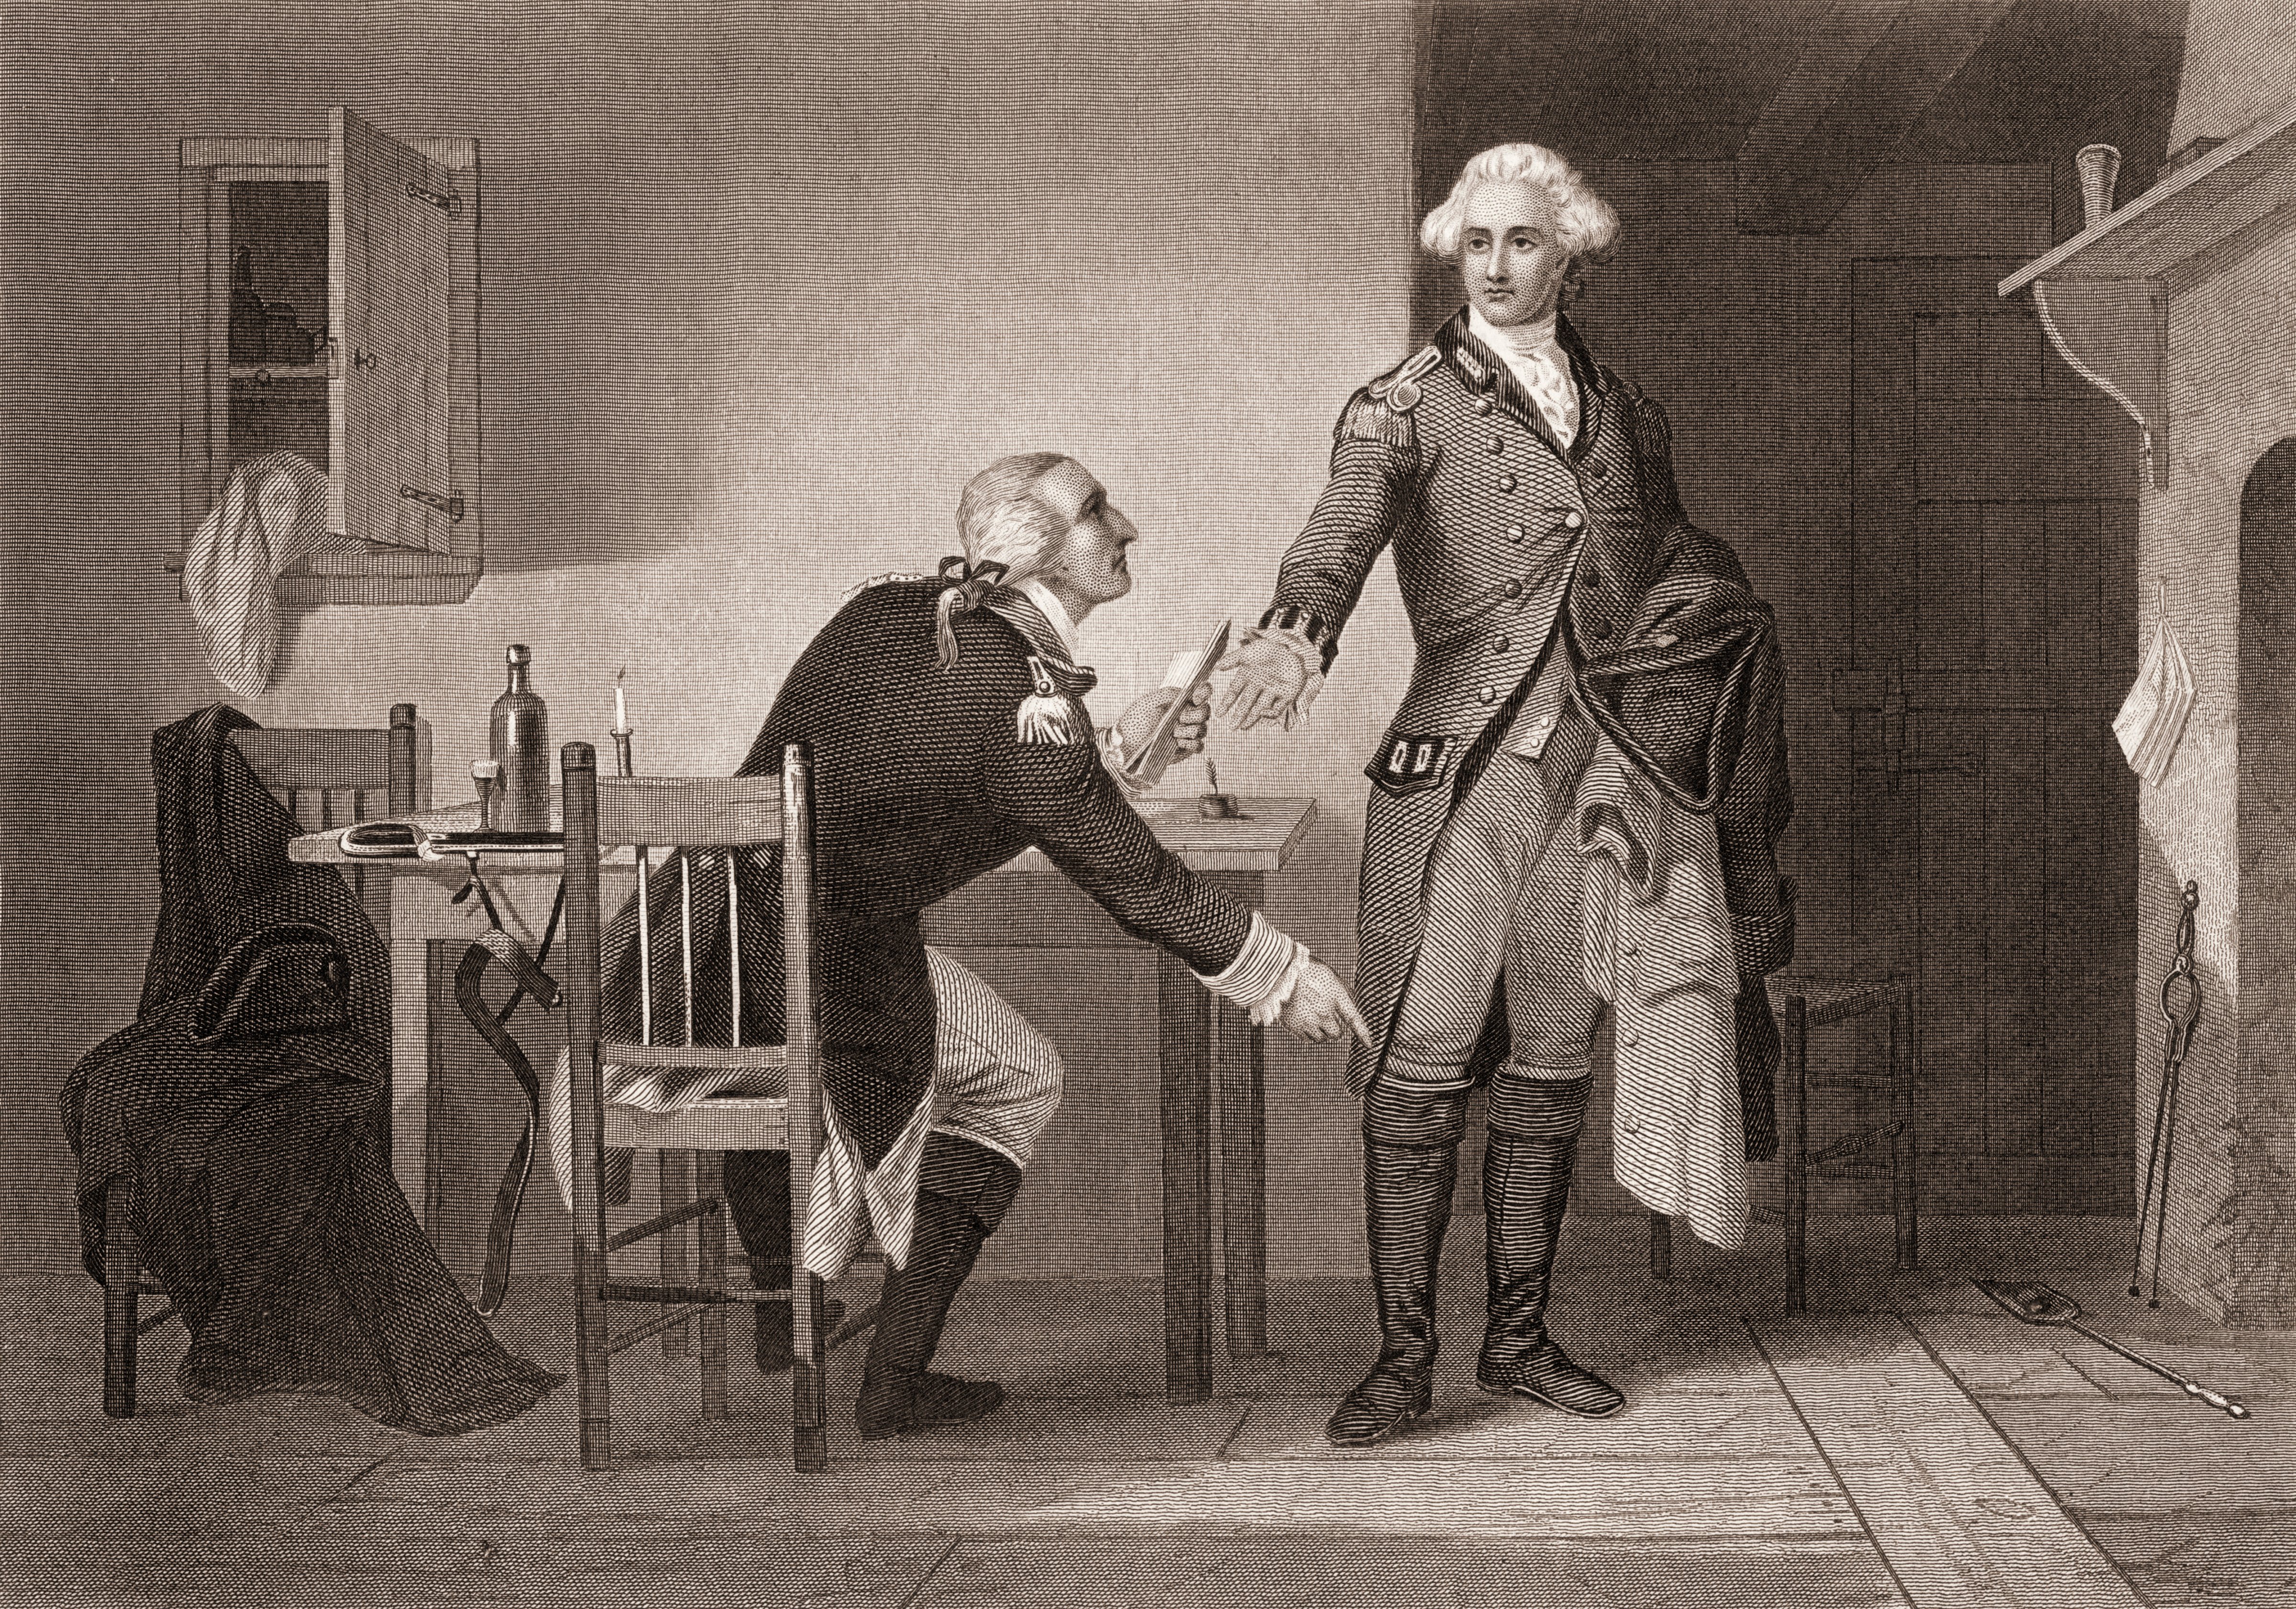 Engraving depicts American army officer Benedict Arnold (1741 - 1801), seated at a table, as he hands papers to British officer John Andre (1750 - 1780) during the American Revolutionary War, mid to late 18th century. Arnold eventually formally switiched sides and joined the British. (Stock Montage&mdash;Getty Images)